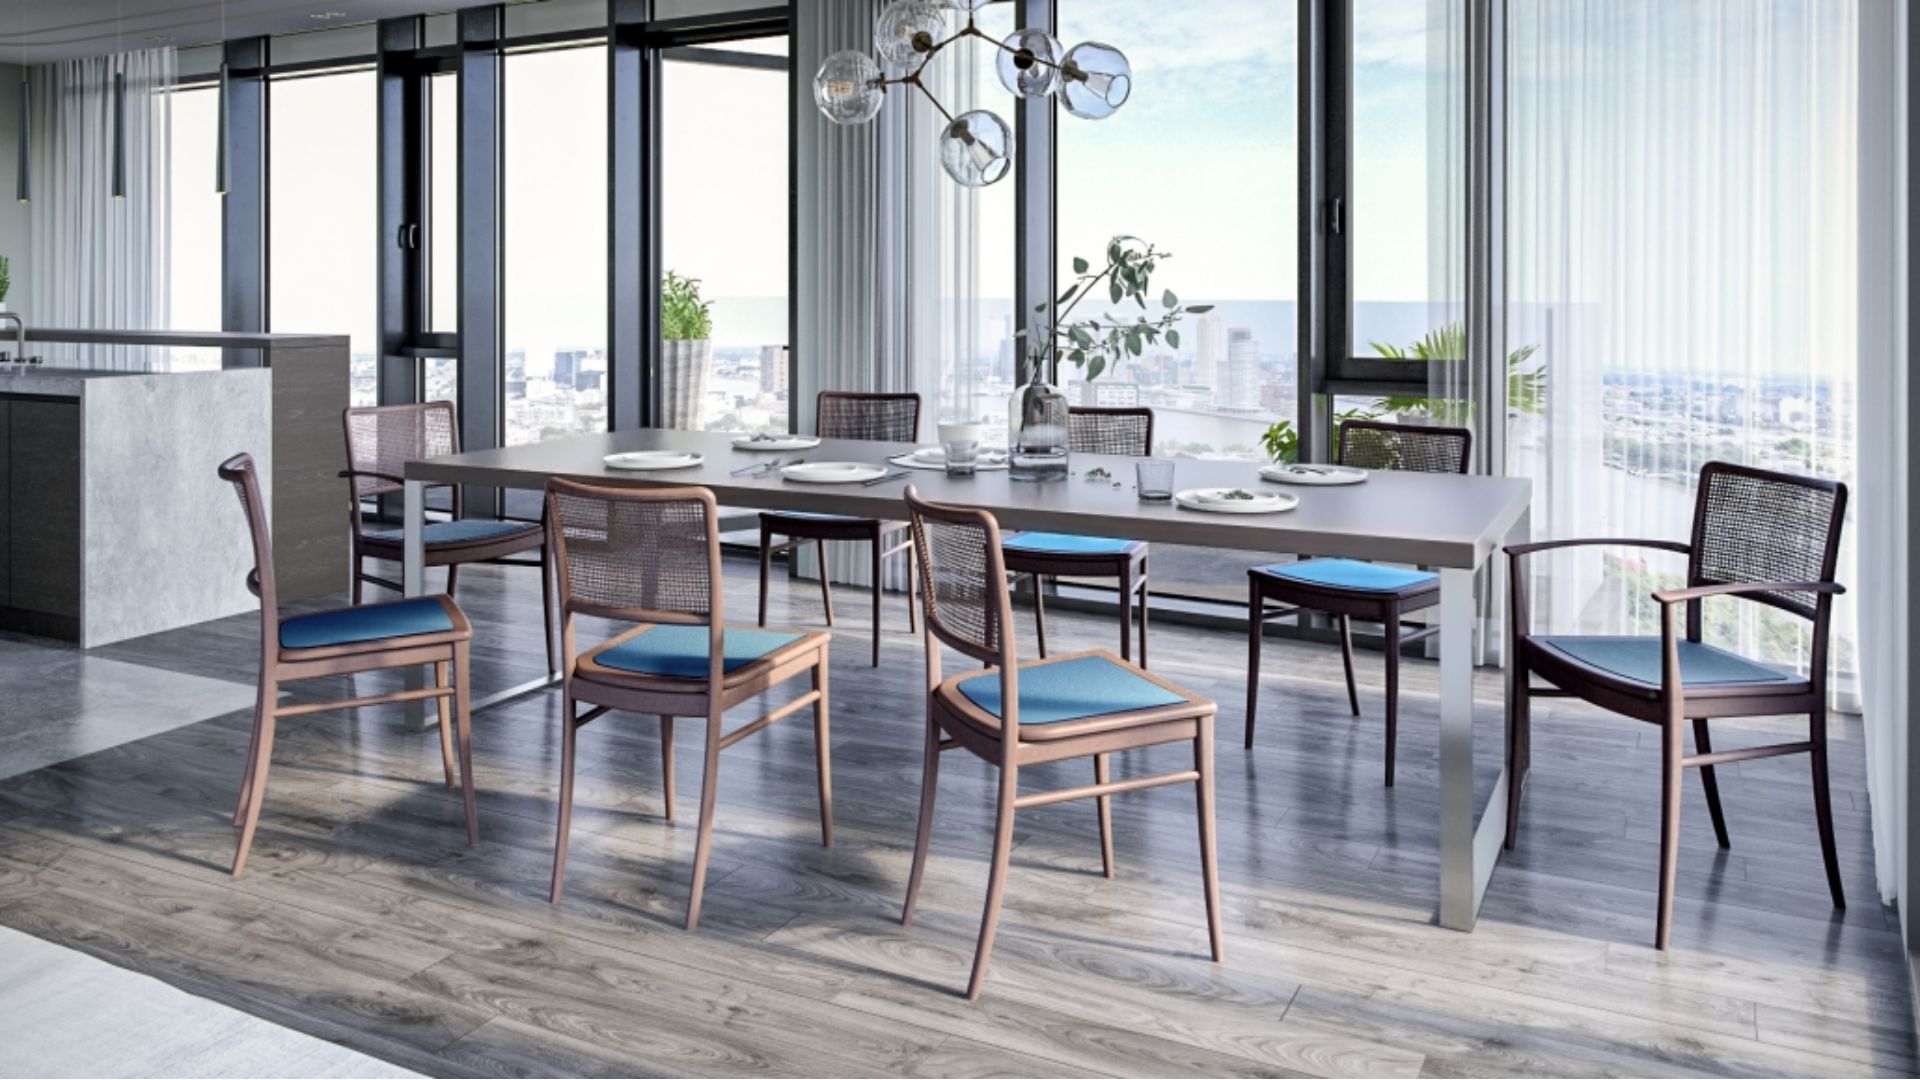 Lifestyle Images for CMcadeiras Tables and Chairs CGI Project